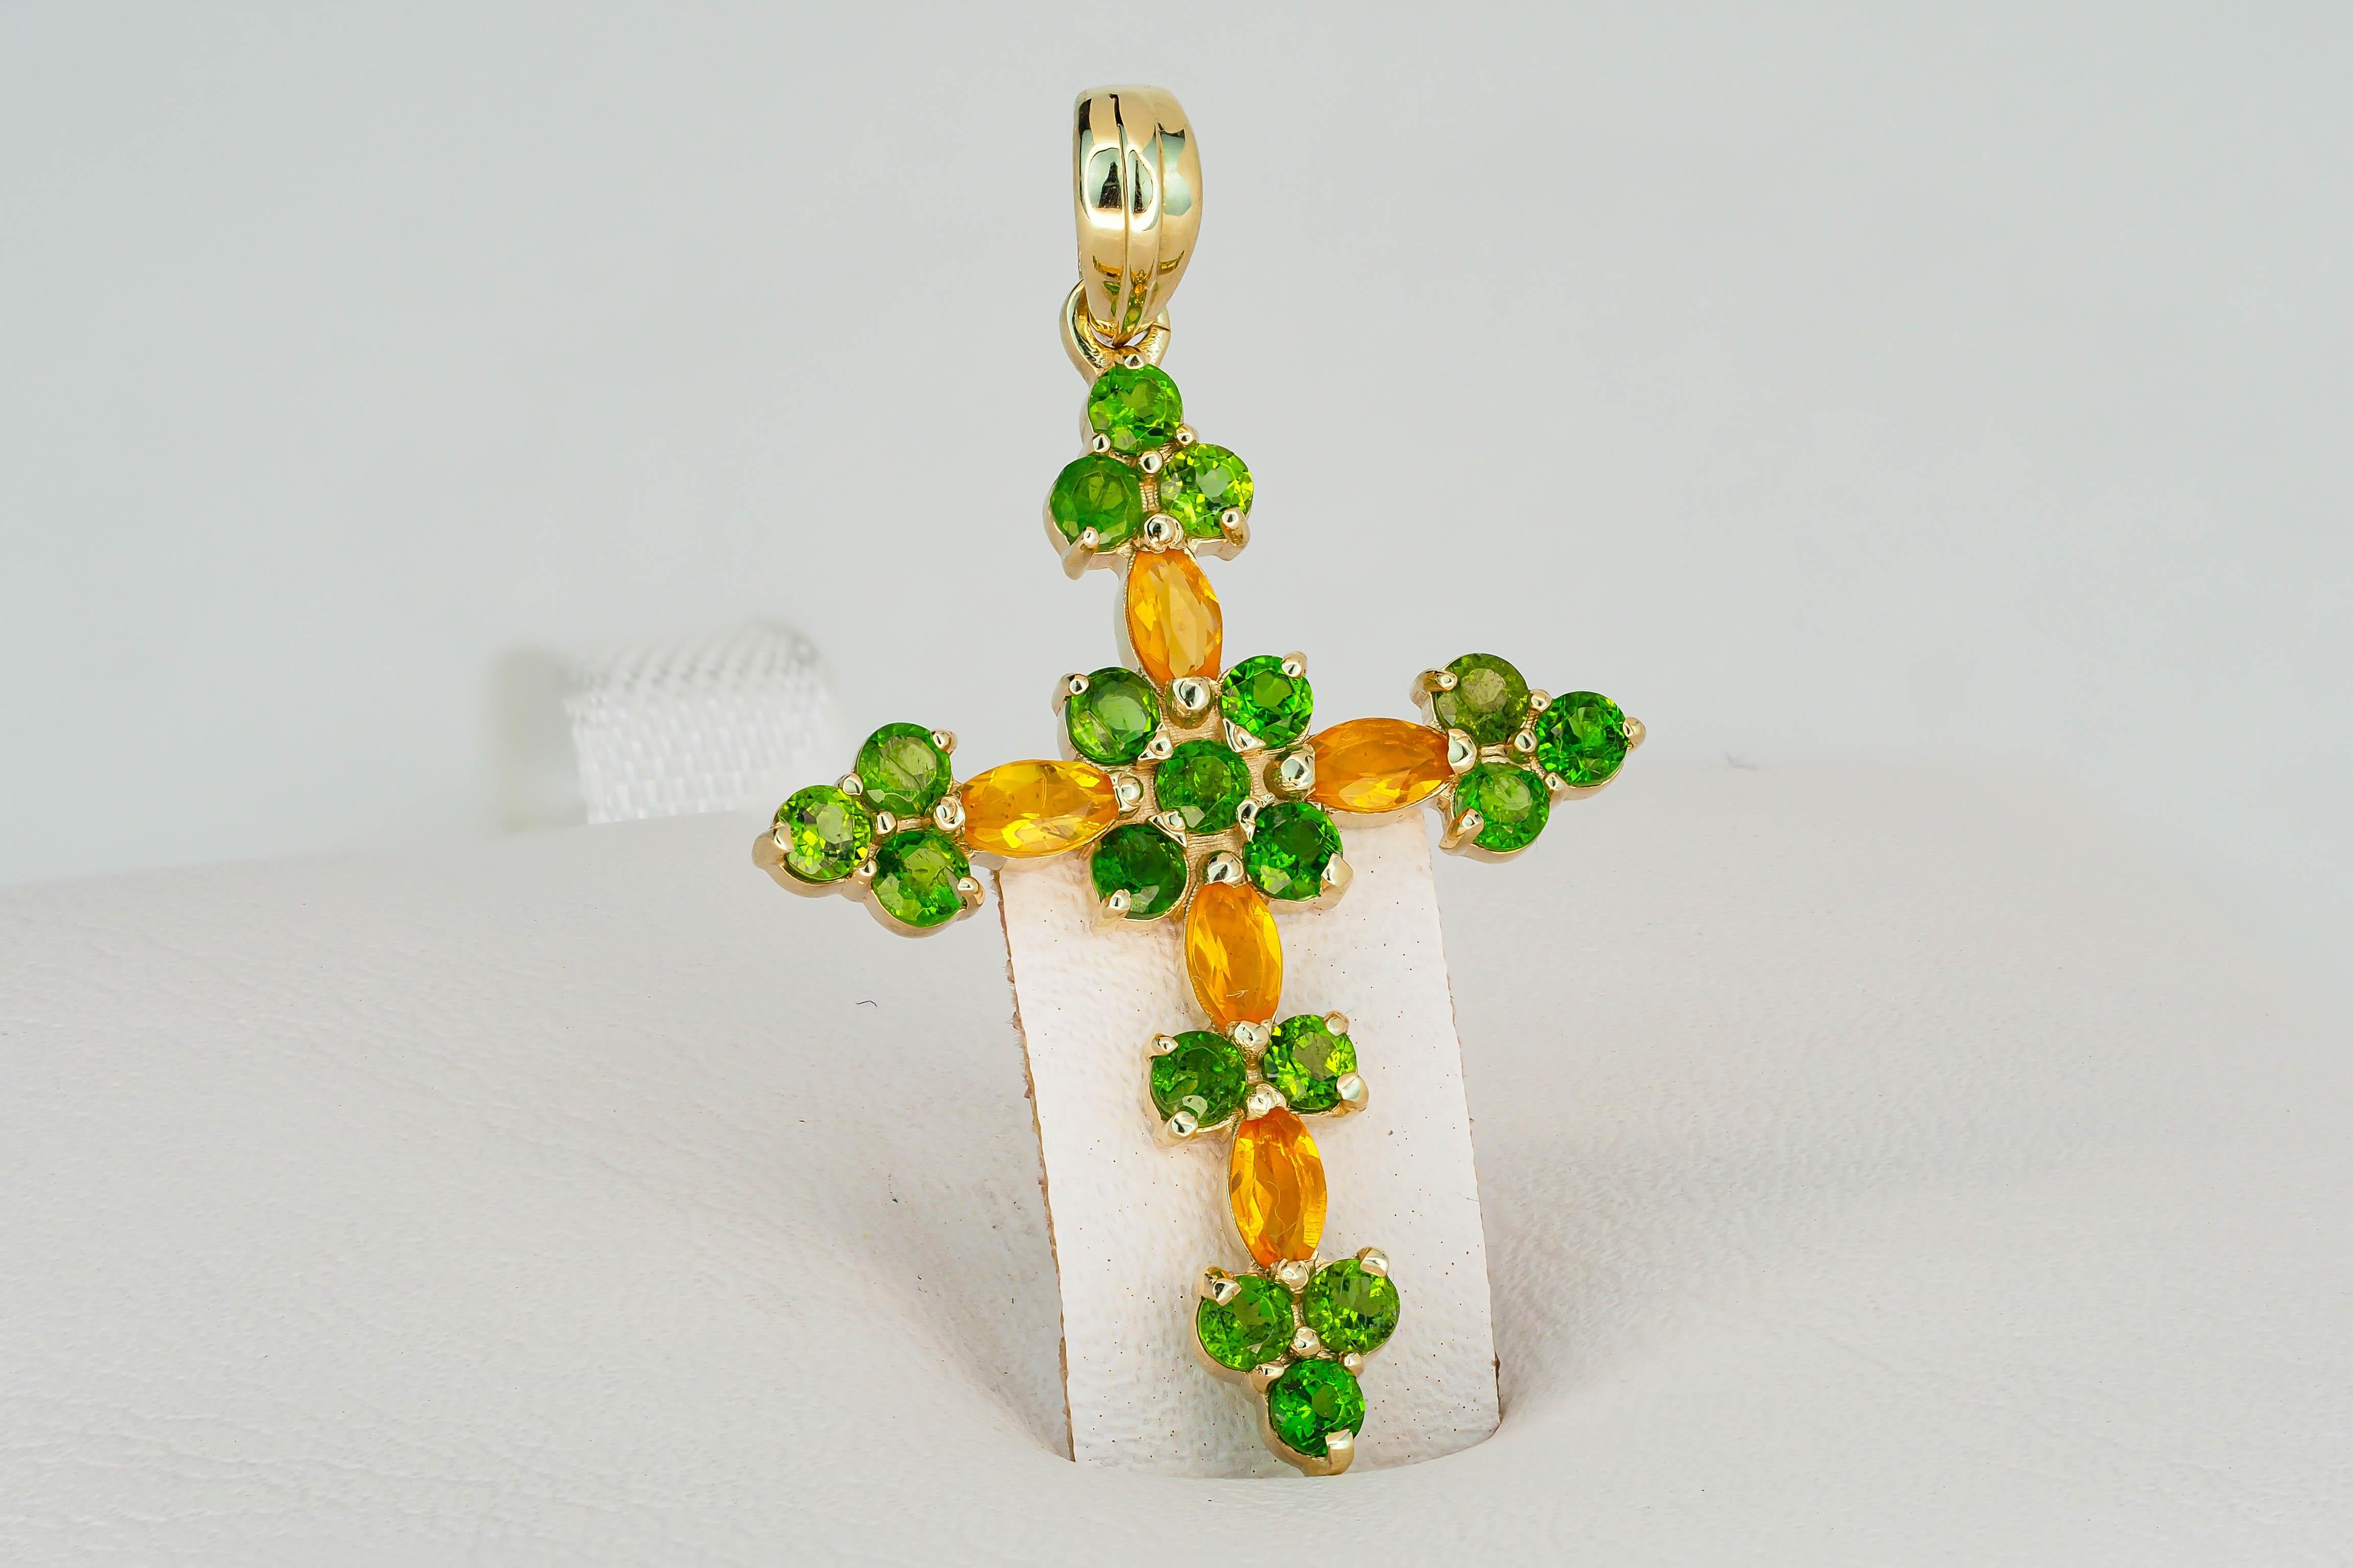 Modern 14k Gold Cross Pendant with Colored Stones Opals and Tsavorites